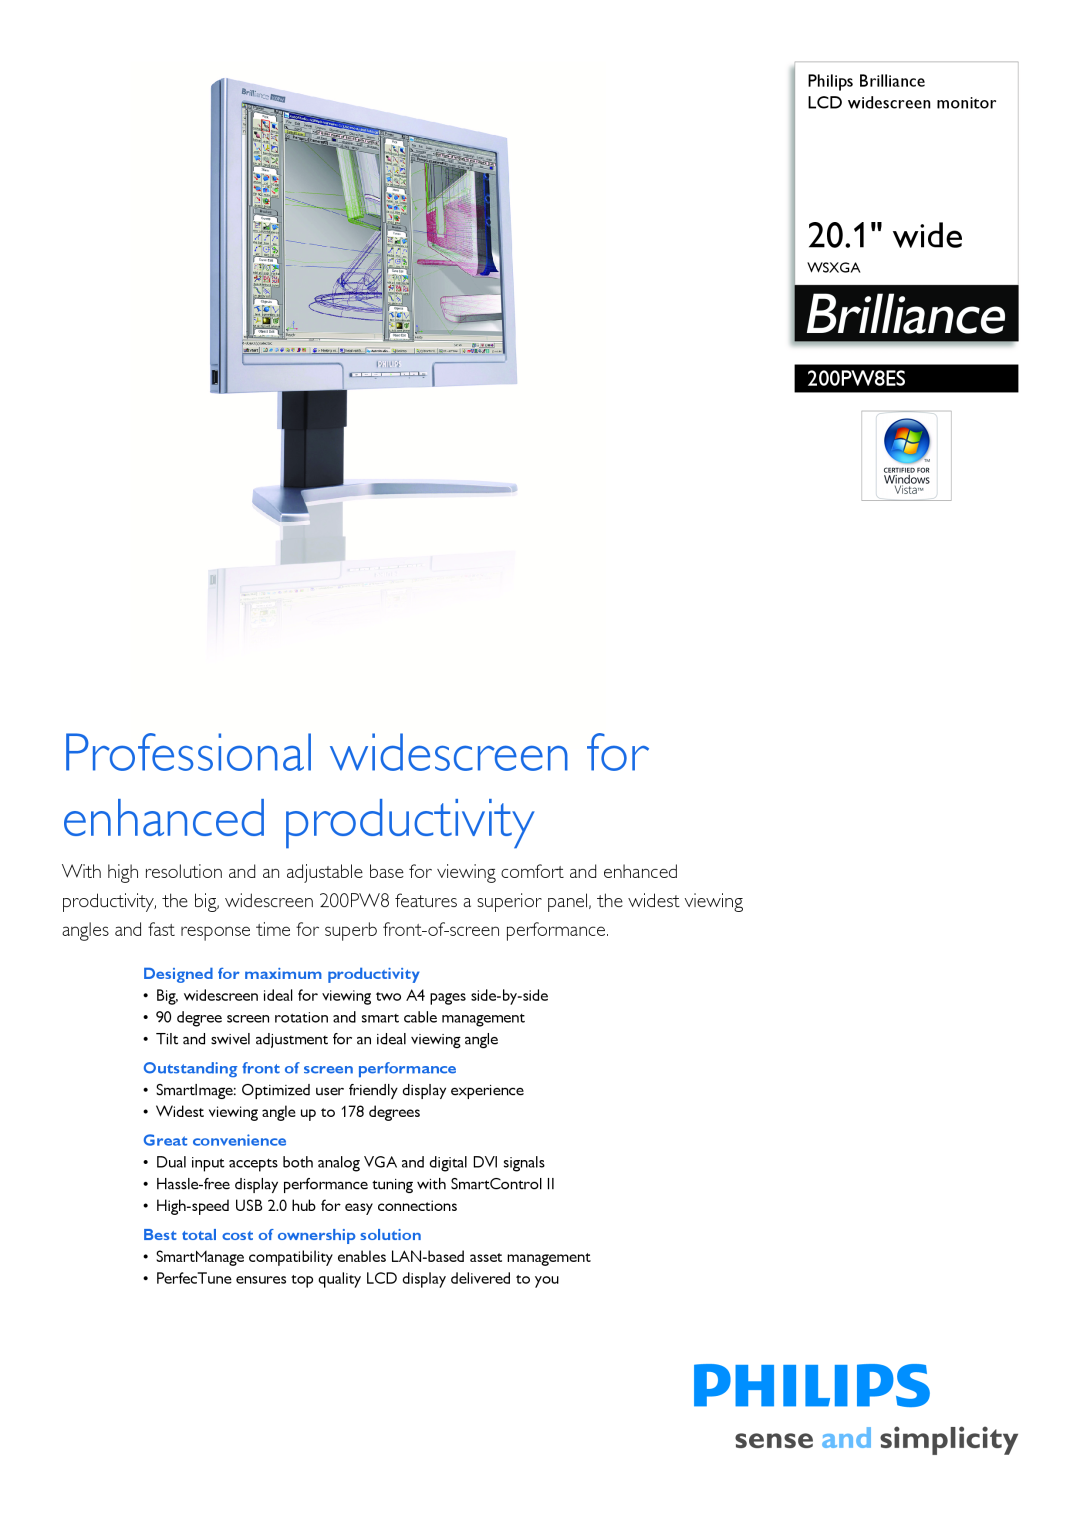 Philips 200PW8ES manual Philips Brilliance LCD widescreen monitor, Designed for maximum productivity, Great convenience 